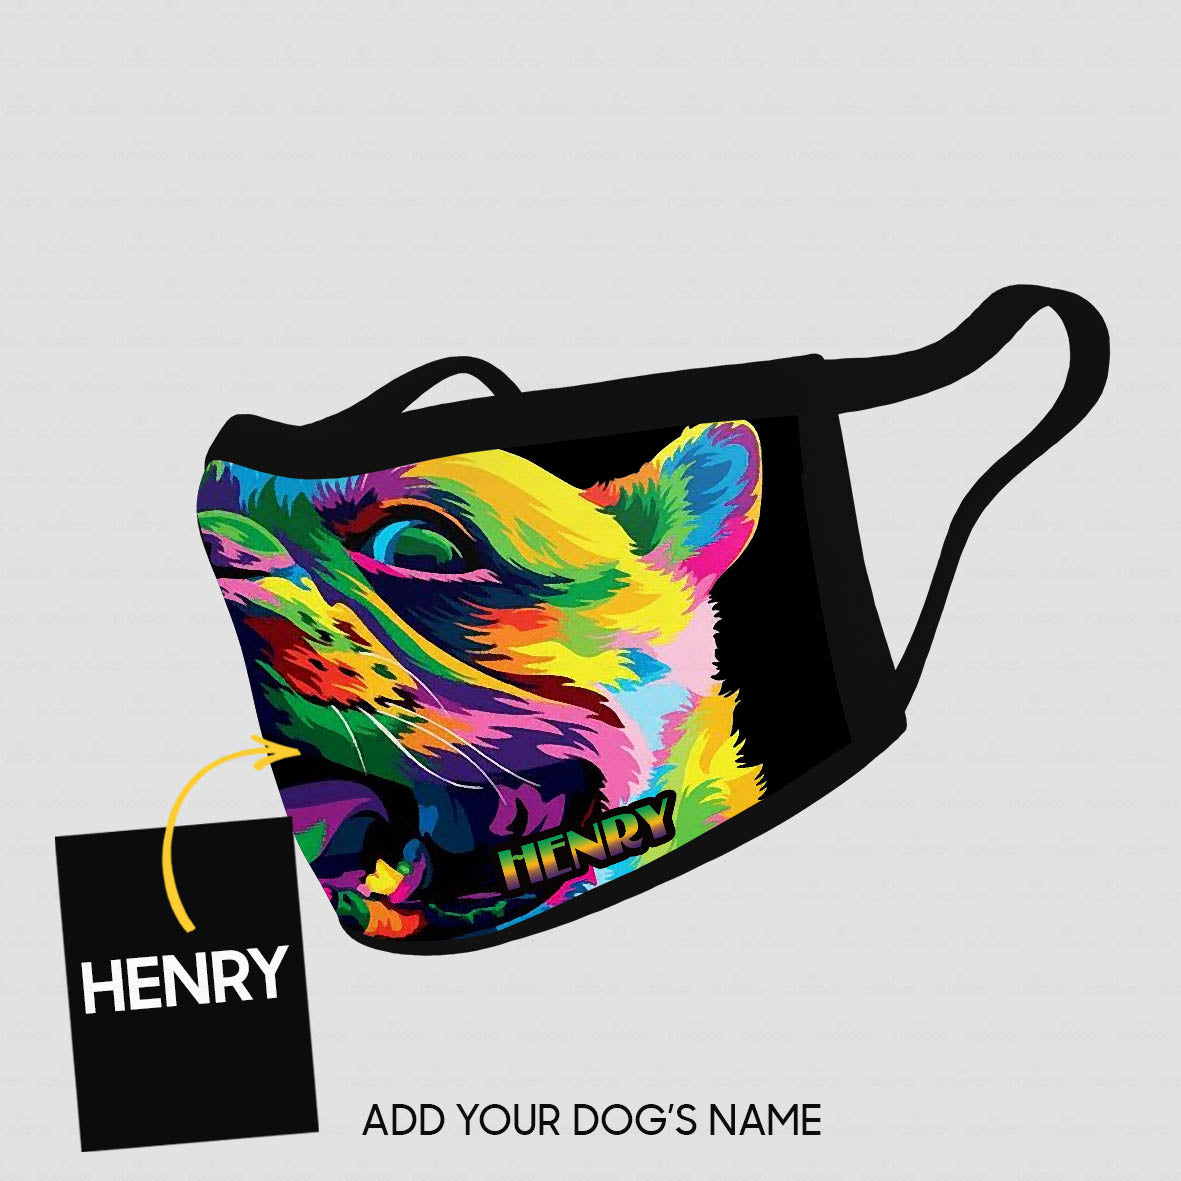 Personalized Dog Gift Idea - Dog With Half Colorful Face For Dog Lovers - Cloth Mask